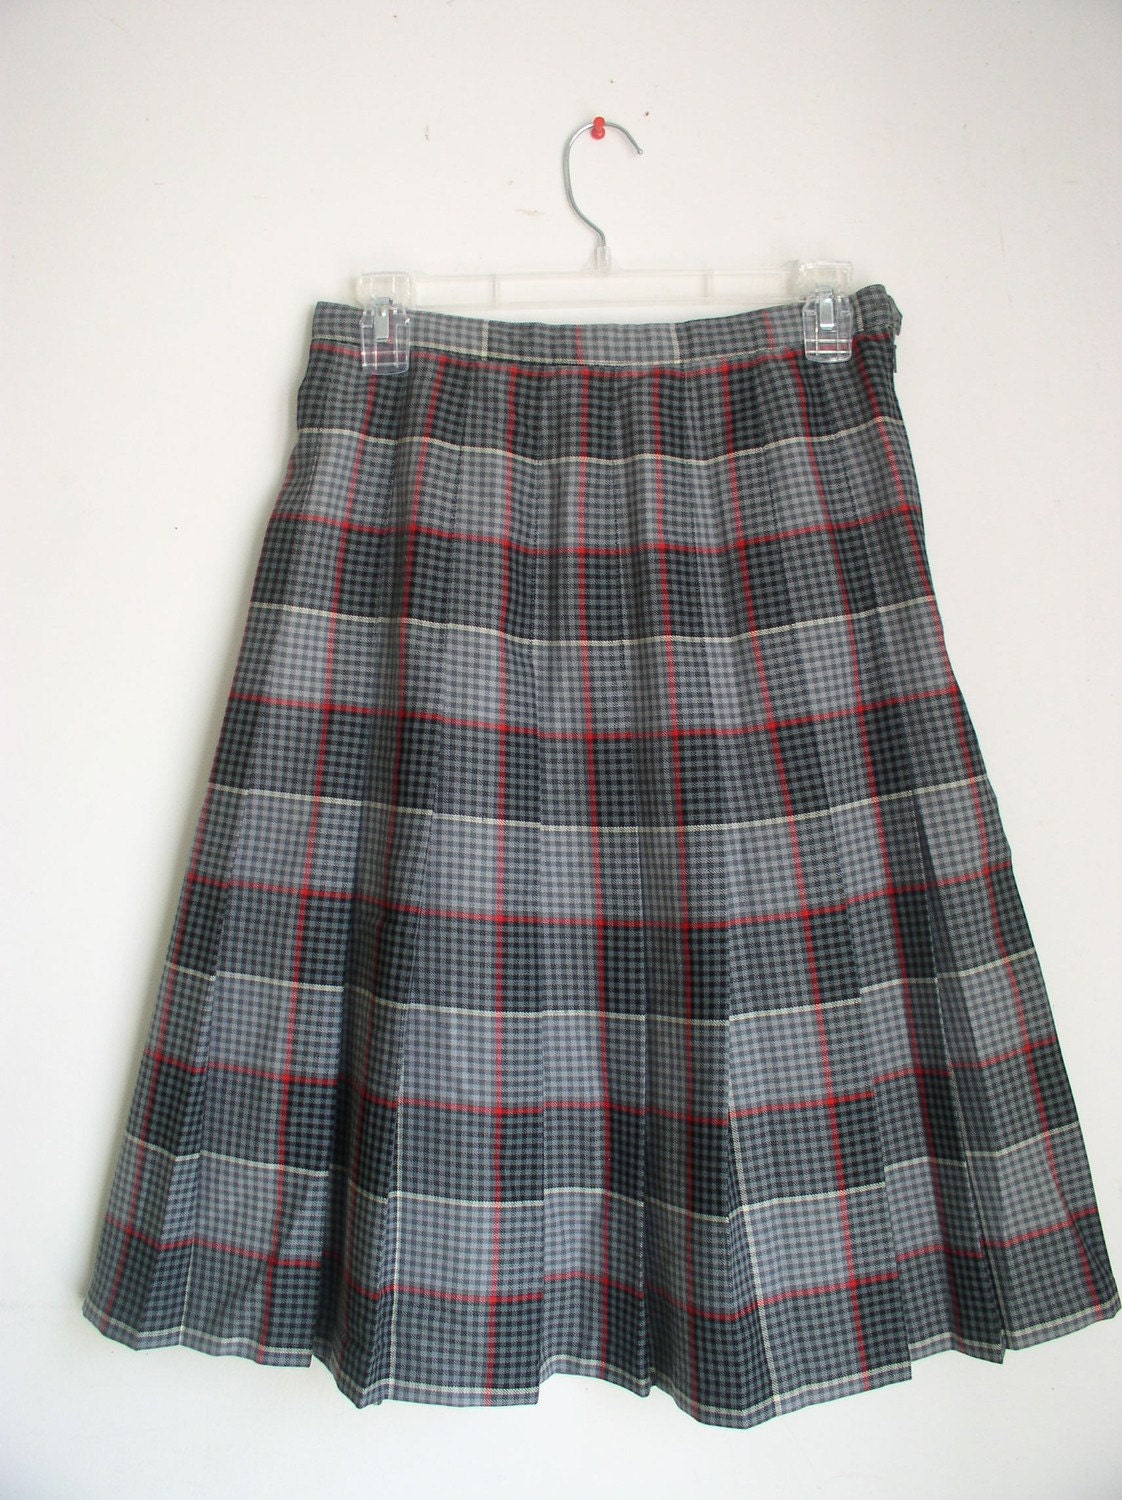 Vintage Womens Skirt/ Pleated Gray/Black/Red and White Plaid